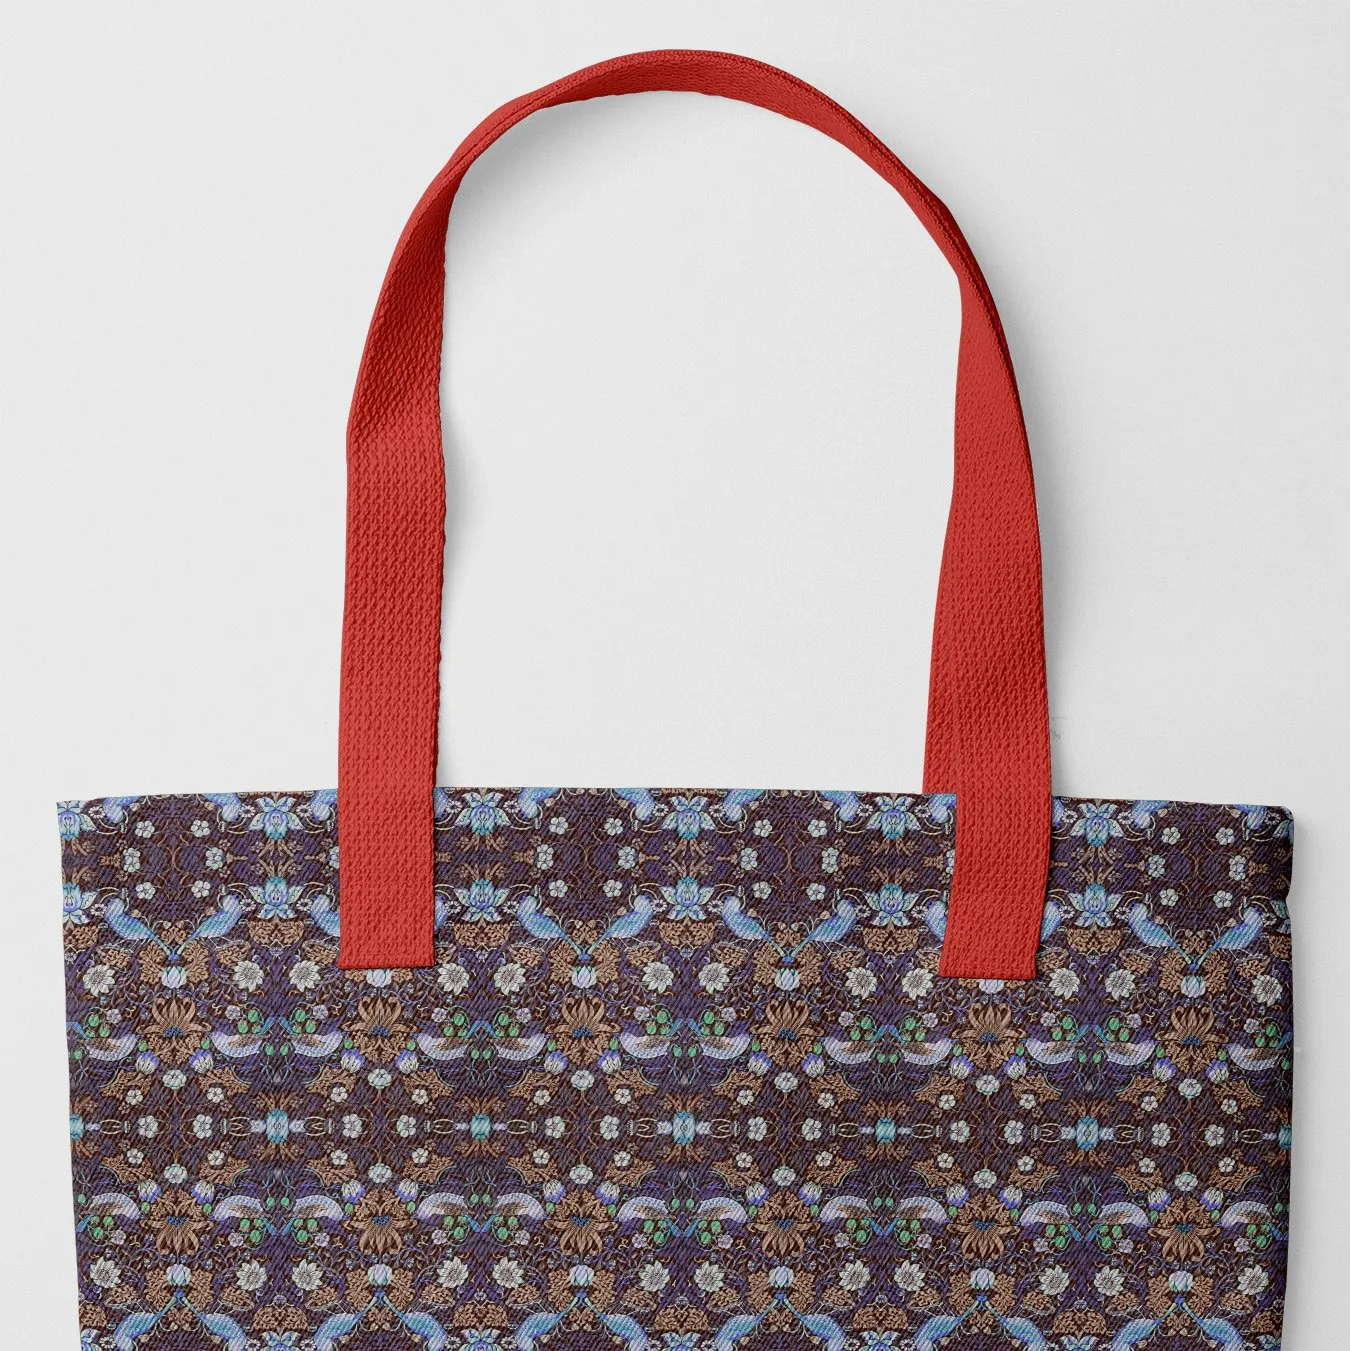 Strawberry Thief Too x 2 Tote - Heavy Duty Reusable Grocery Bag - Red Handles - Shopping Totes - Aesthetic Art